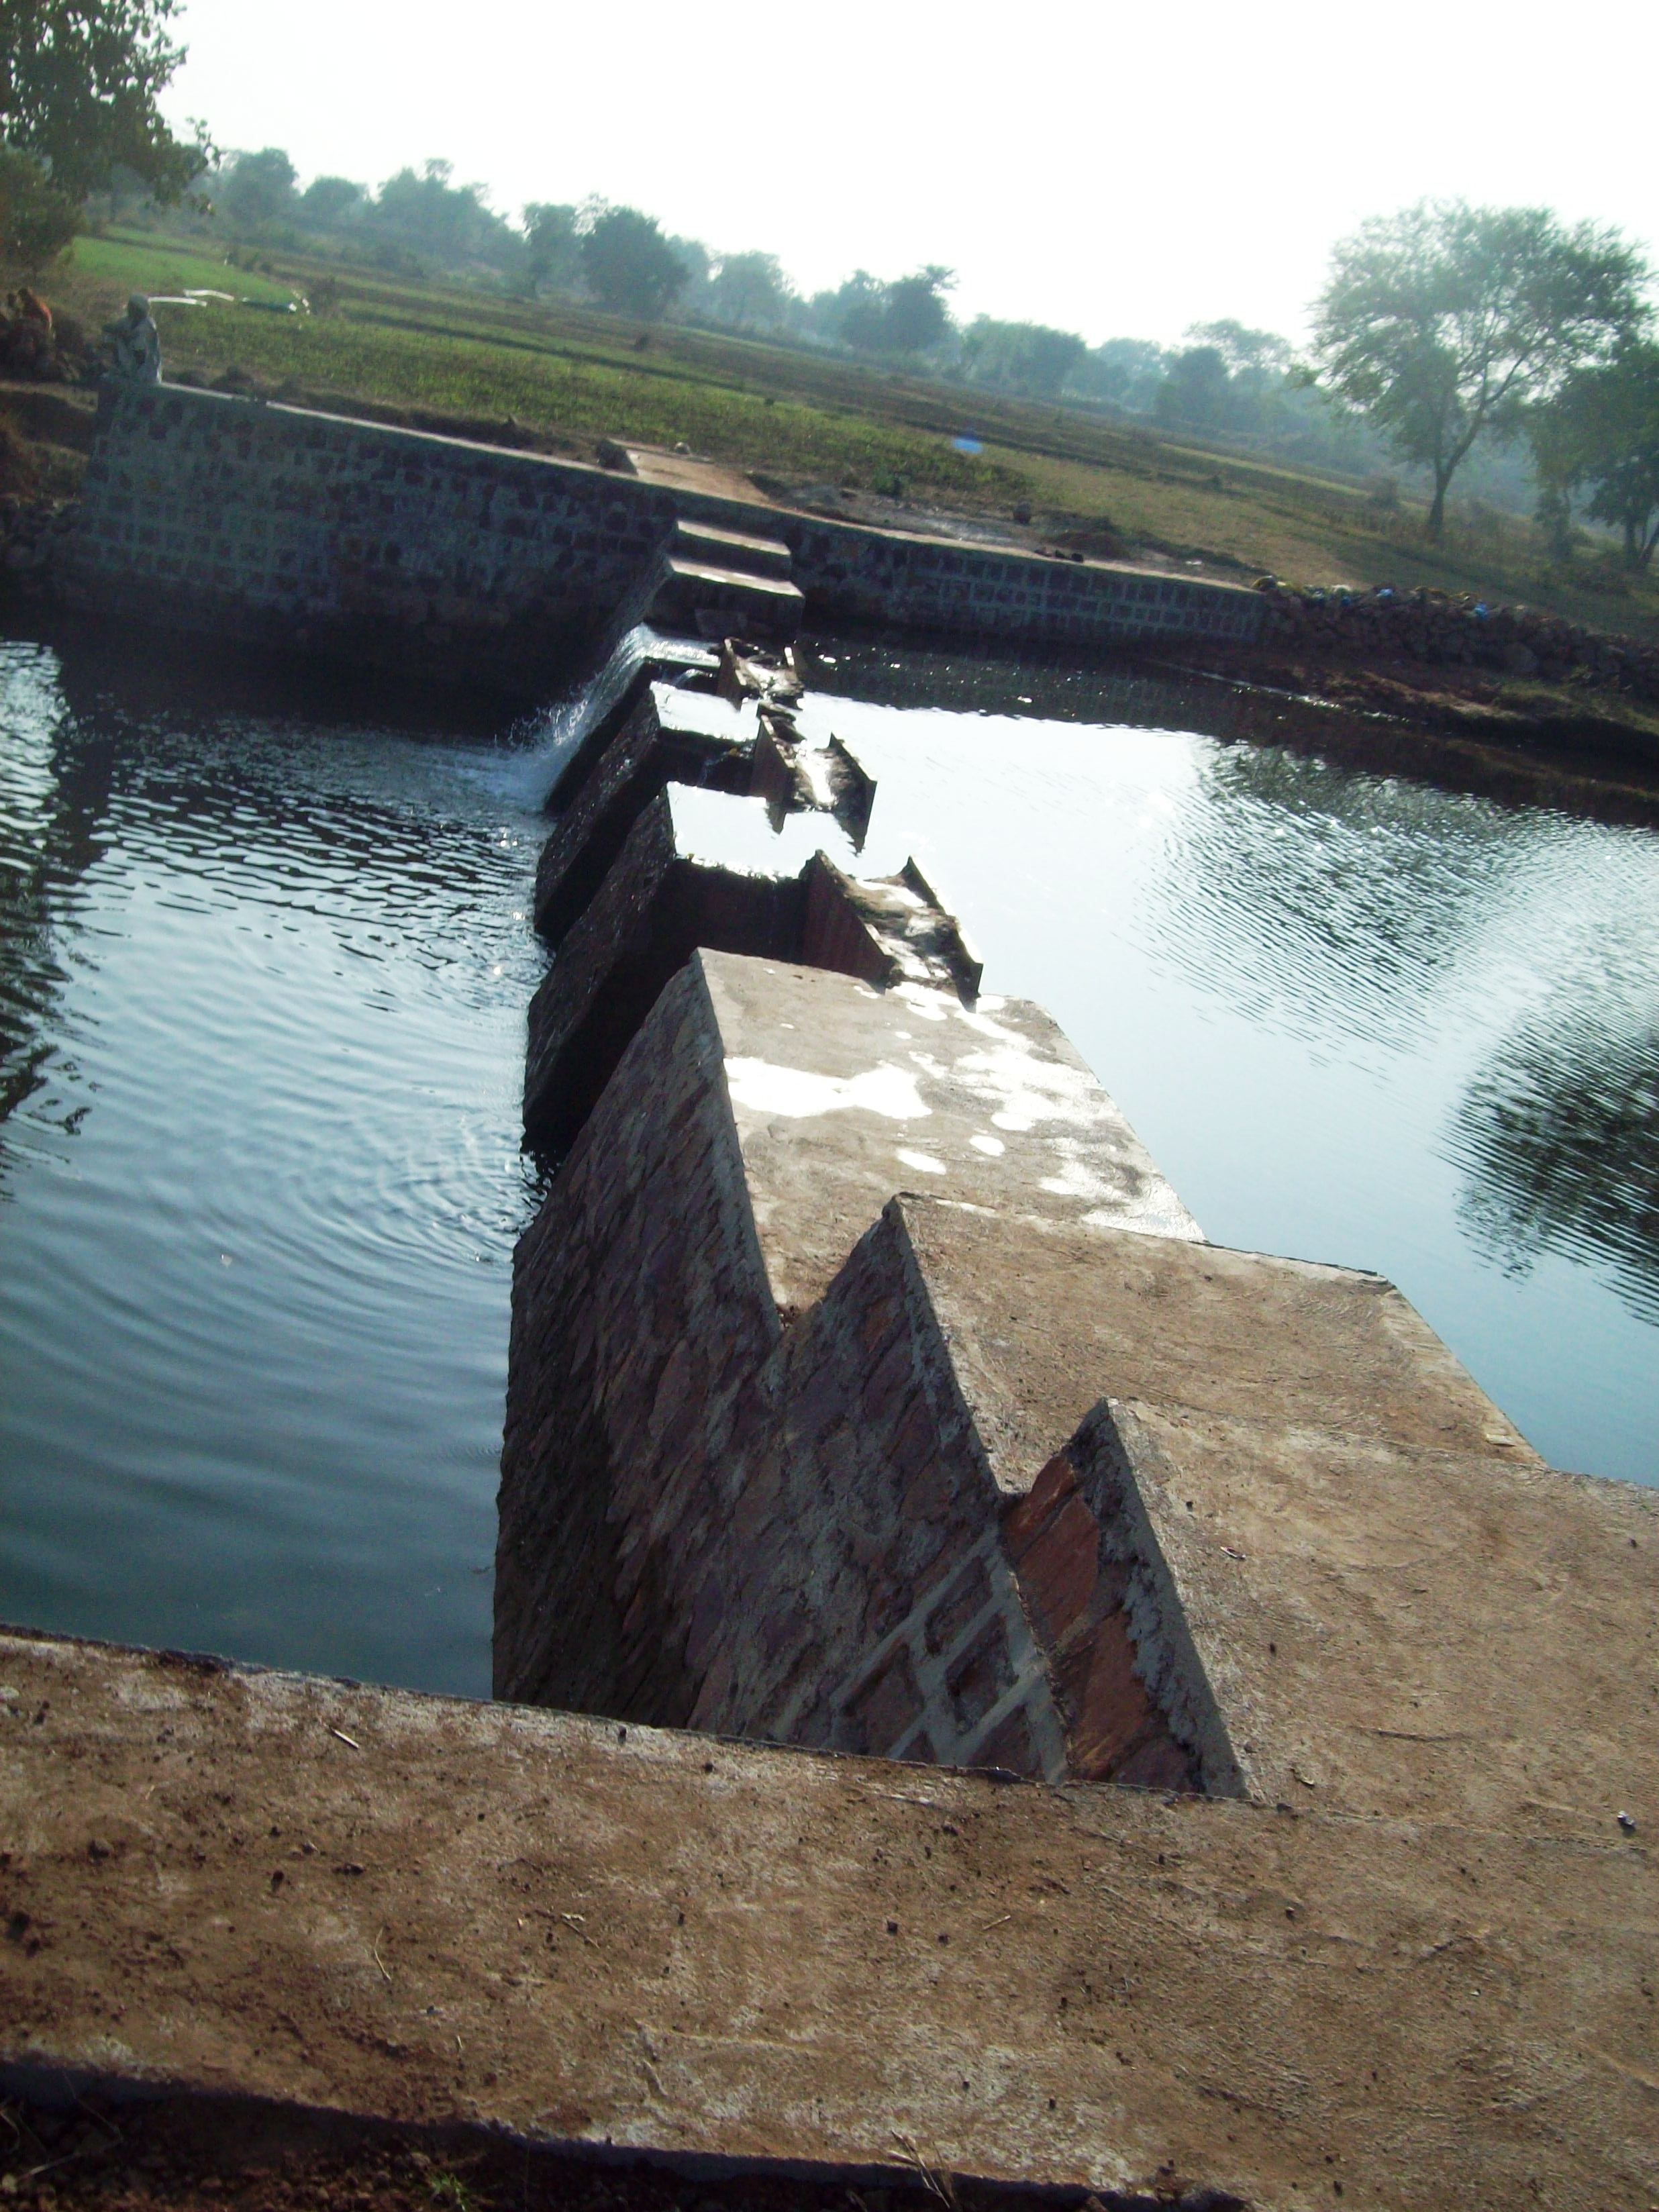 The improved water levels in the dug wells of the area